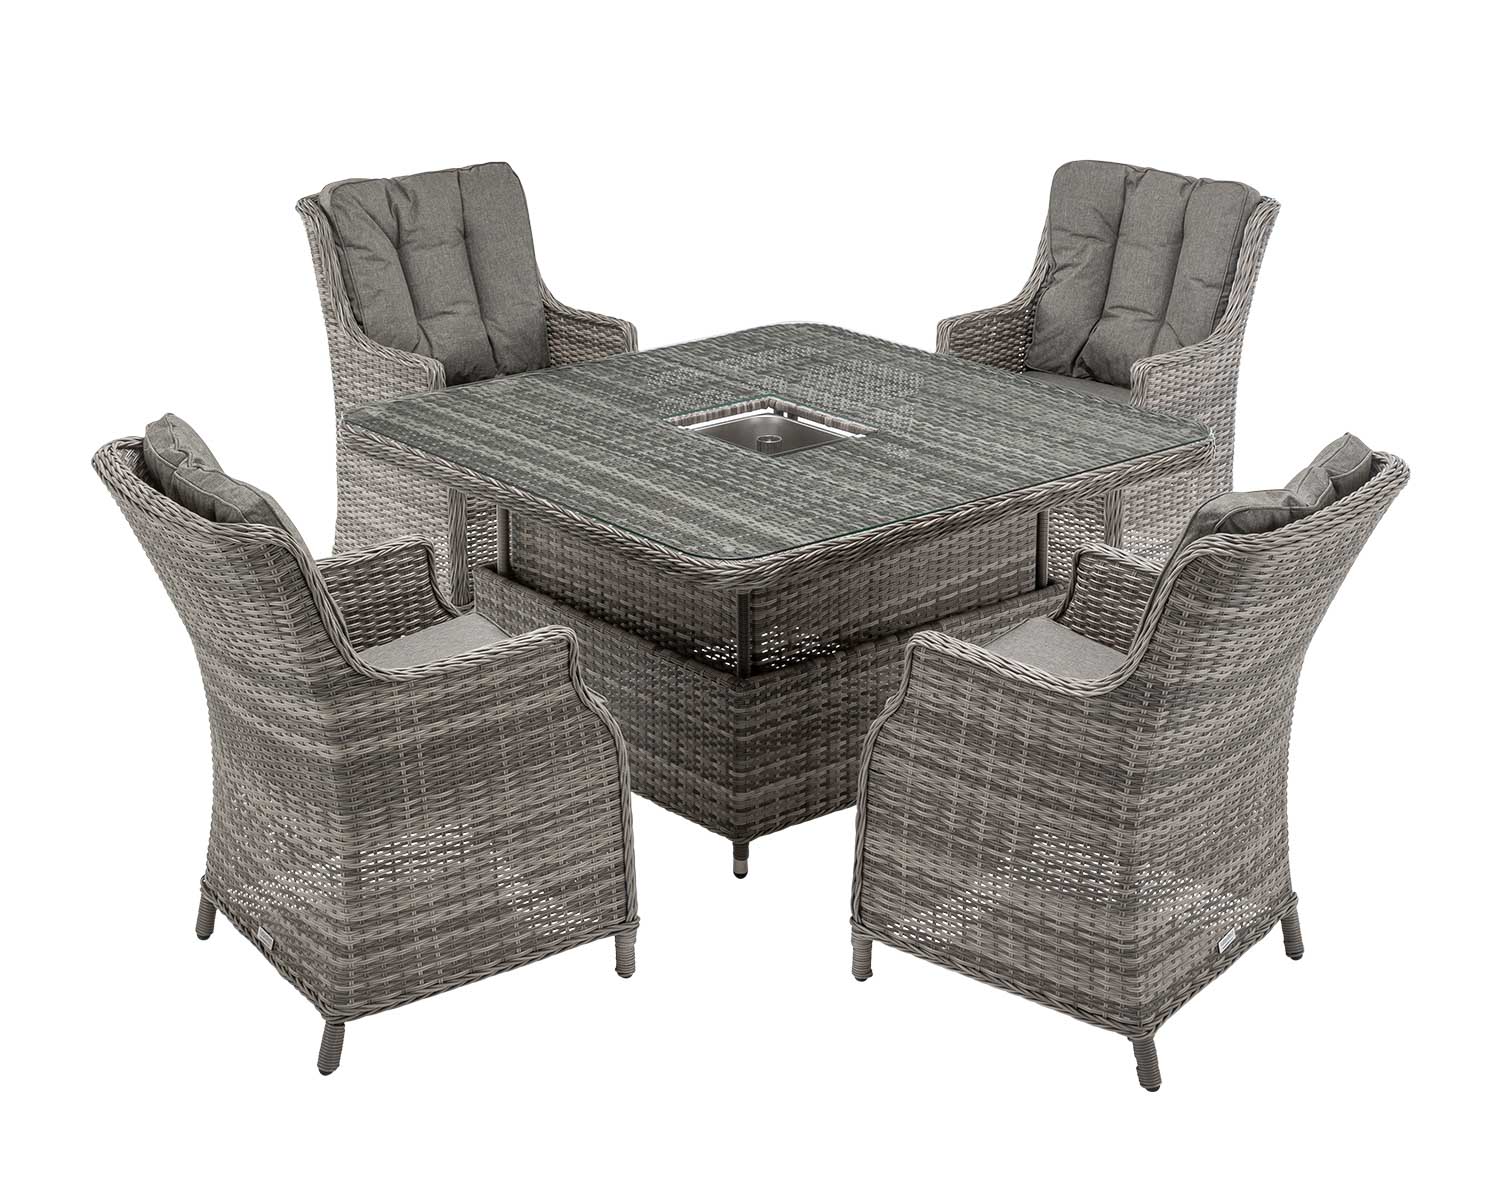 4 Seat Rattan Garden Dining Set With Square Table In Grey With Ice Bucket Riviera Rattan Direct